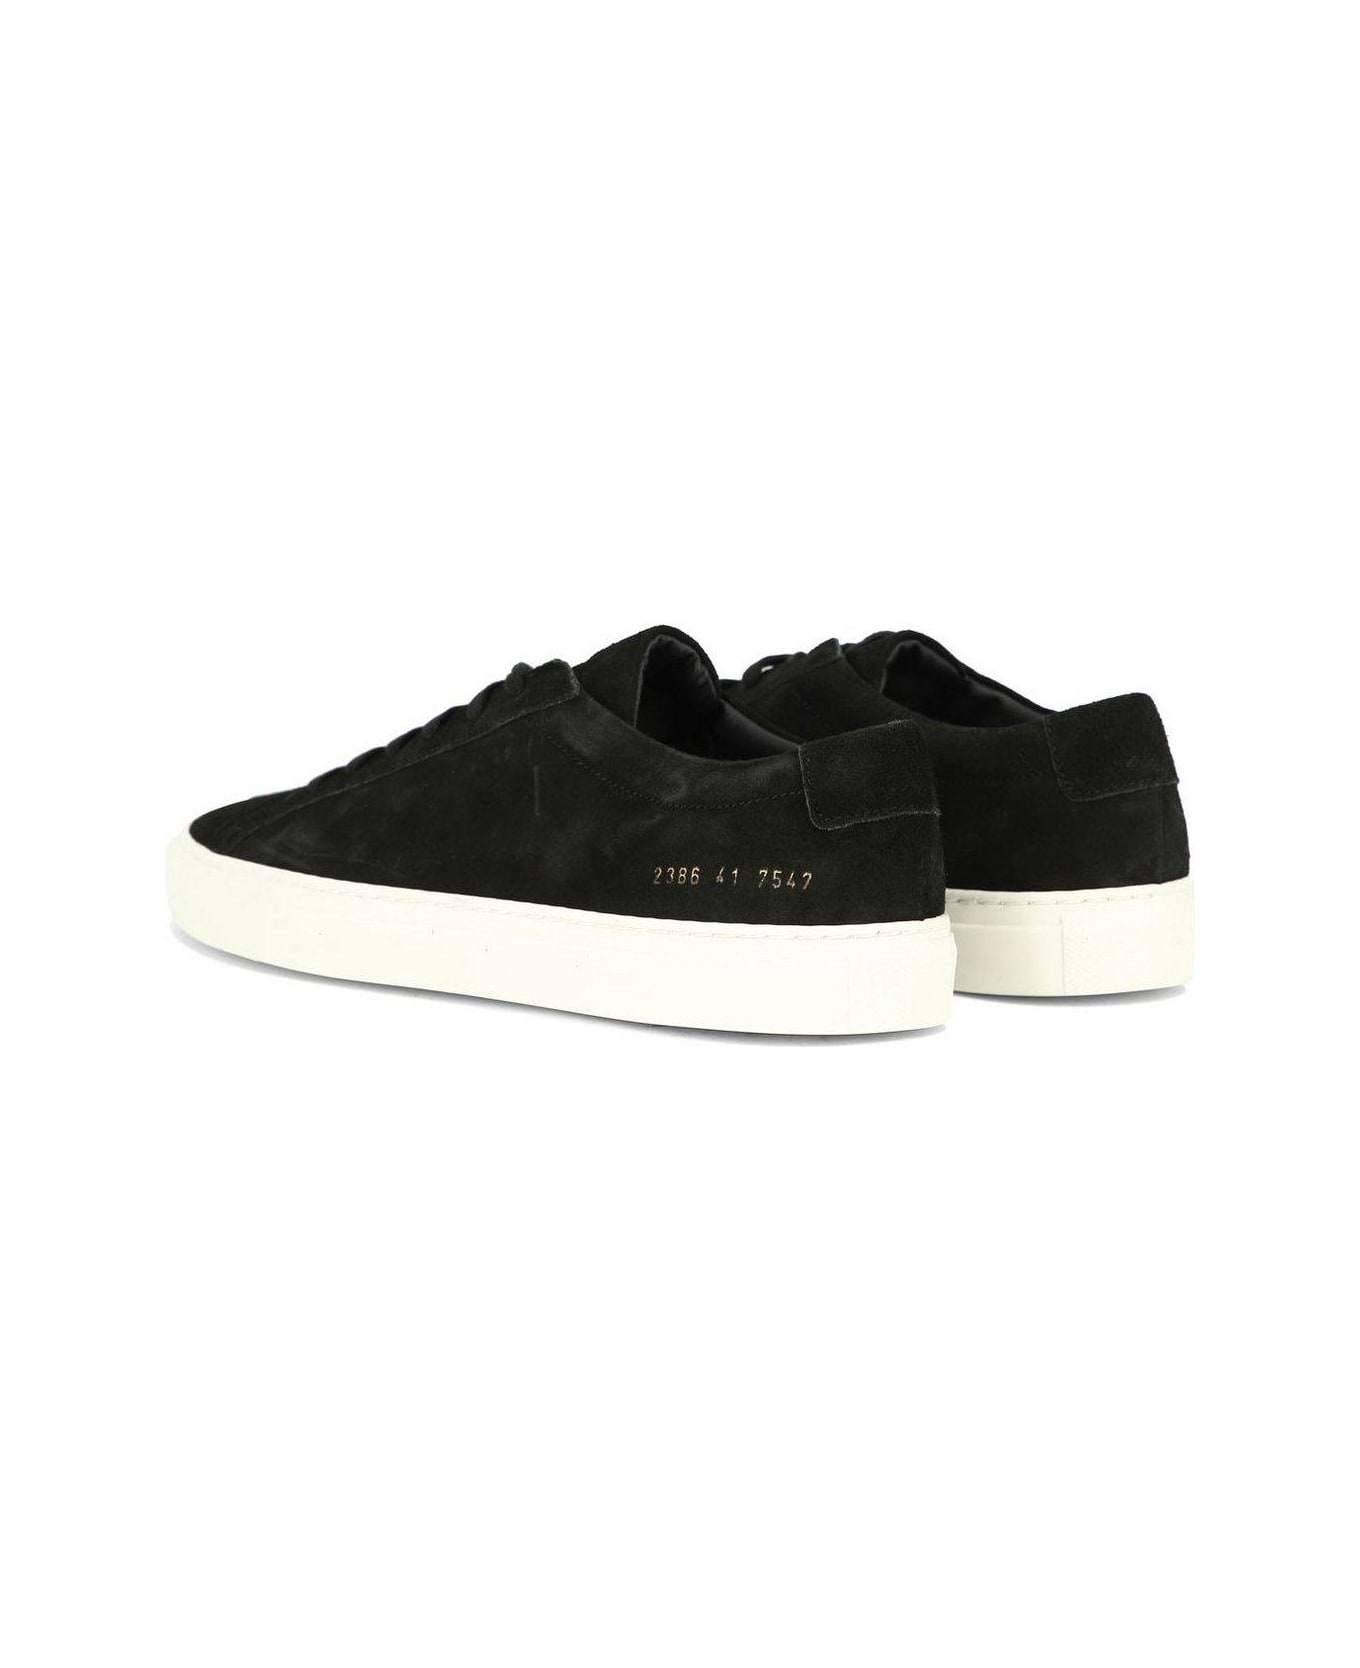 Common Projects Achilles Sneakers In Black Suede - Black